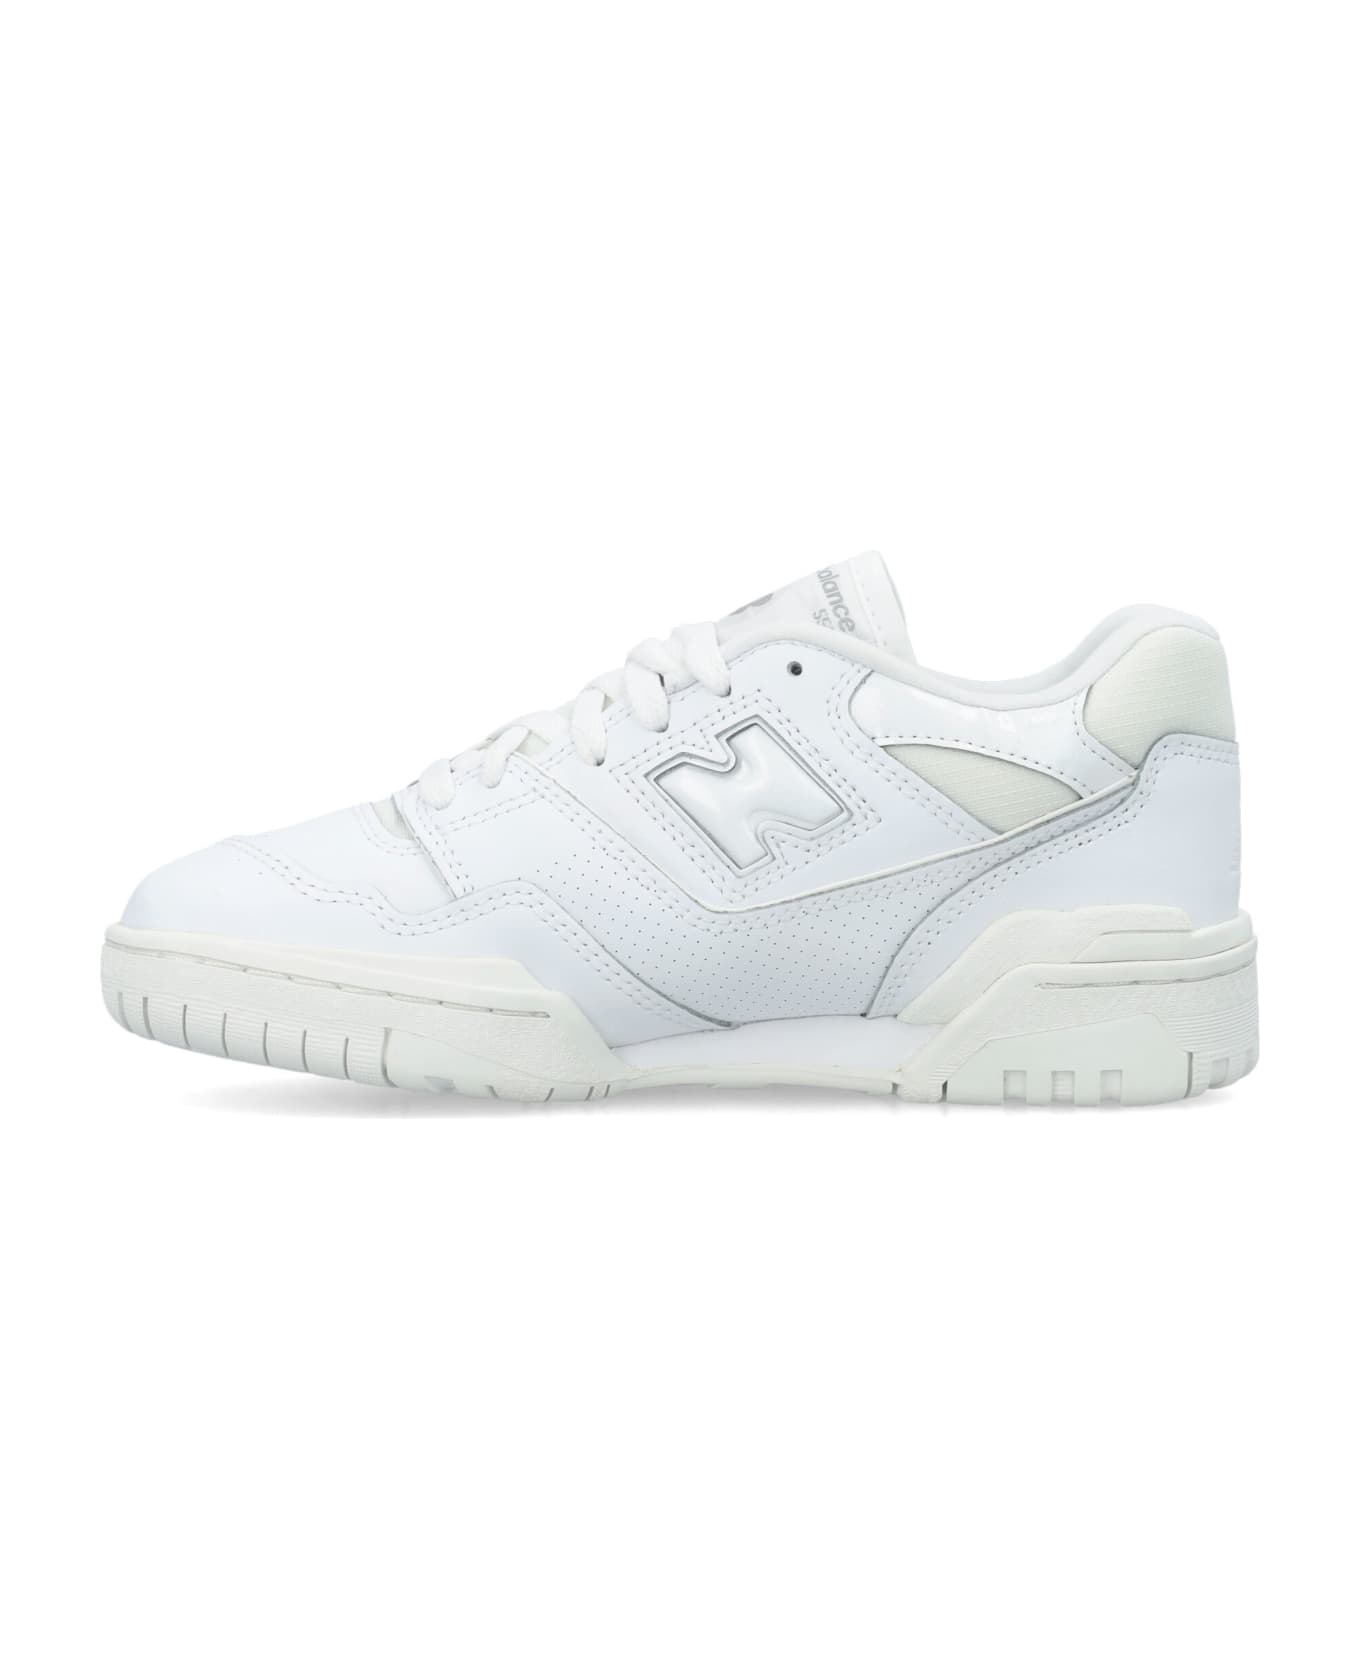 New Balance 550 Woman's Sneakers - WHITE PATENT